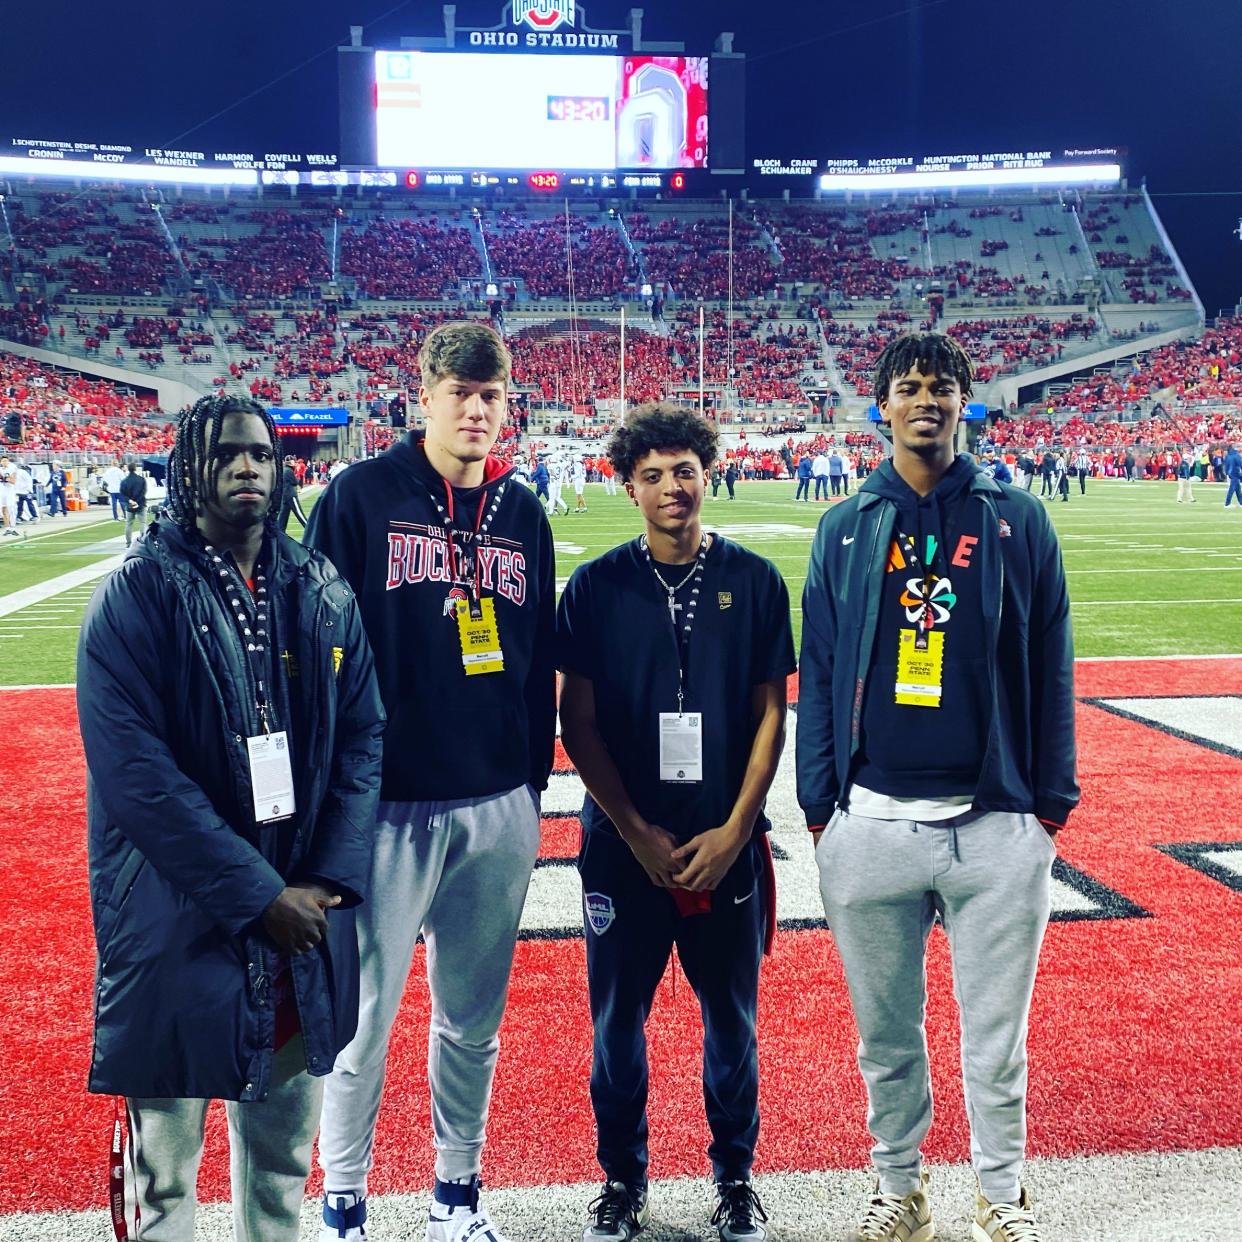 The Ohio State men's basketball program hosted (L-R) Jahnathan Lamothe, Austin Parks, George Washington III and Sean Stewart during the football team's October 30 game against Penn State. Lamothe, Washington and Stewart were on official visits.